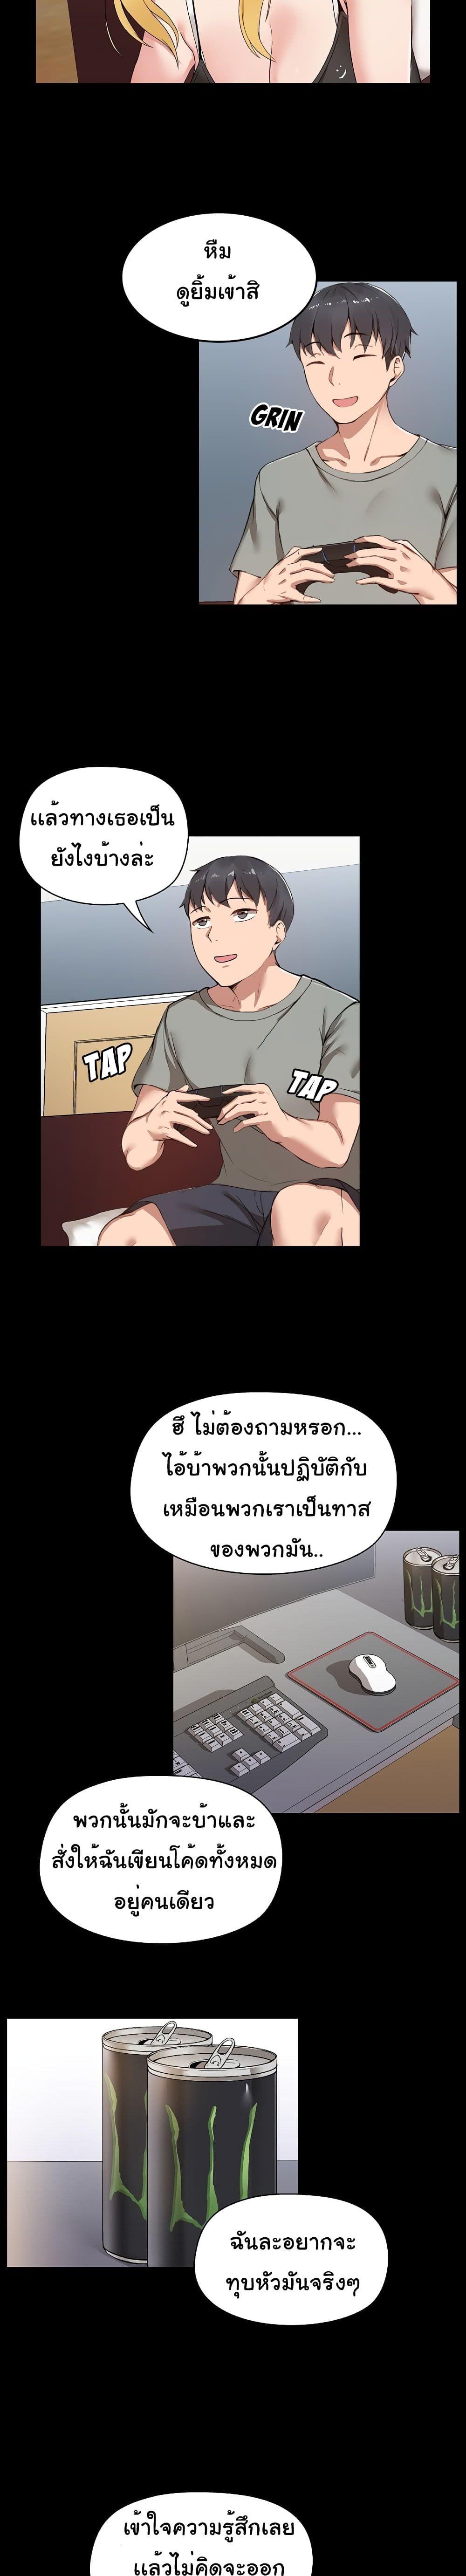 All About That Game Life 1 ภาพ 8